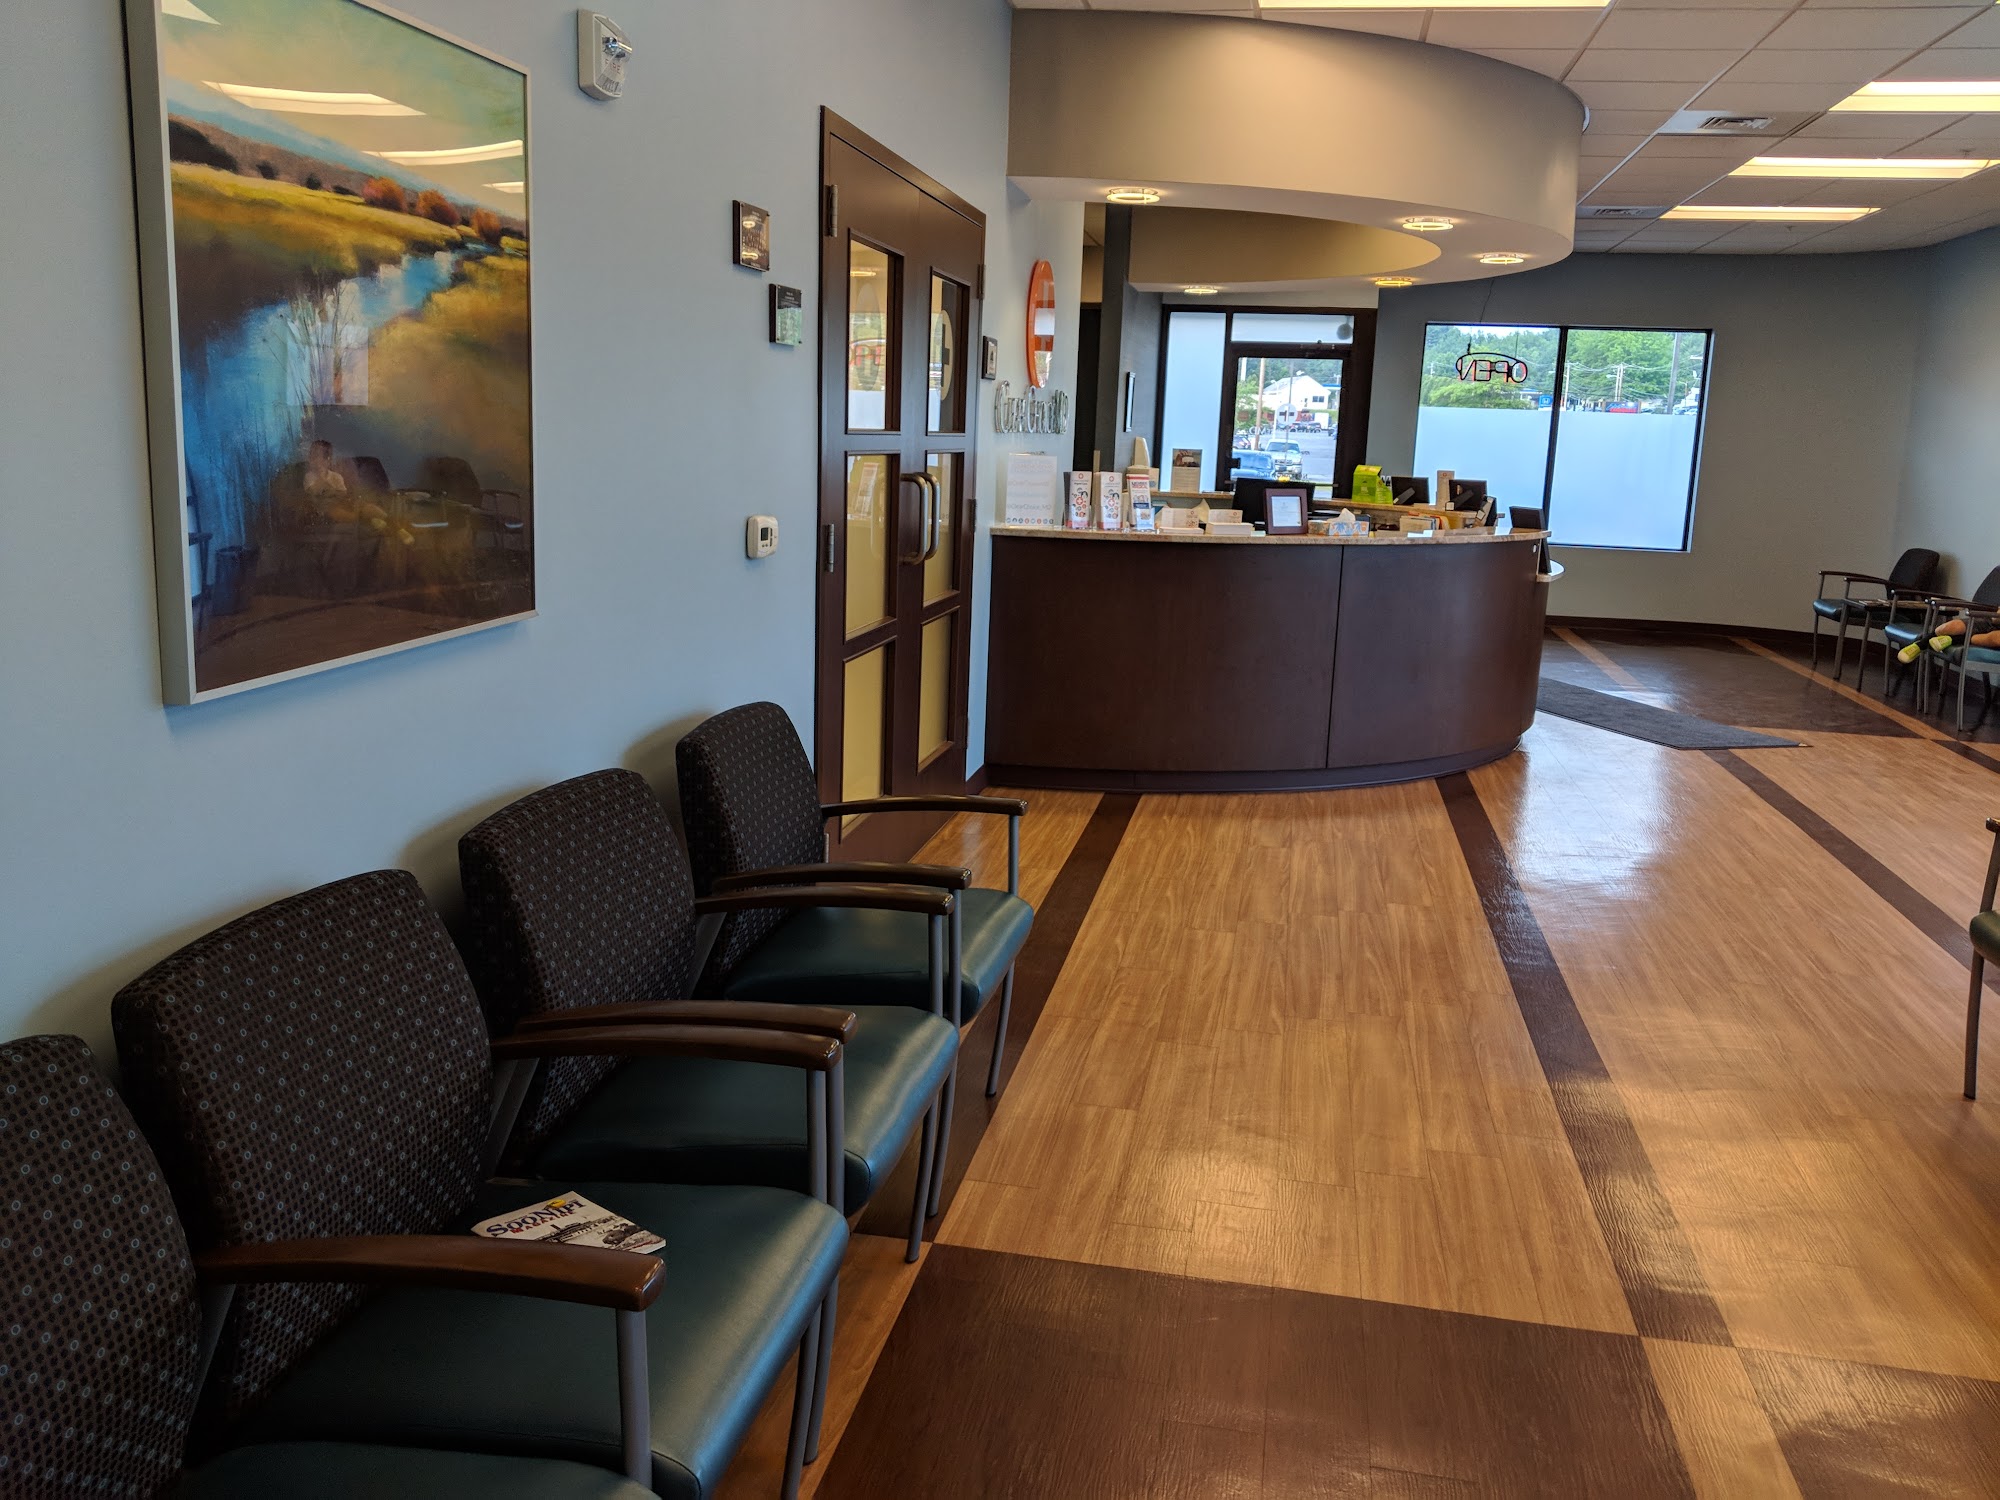 ClearChoiceMD Urgent Care | Lebanon 410 Miracle Mile, Lebanon New Hampshire 03766